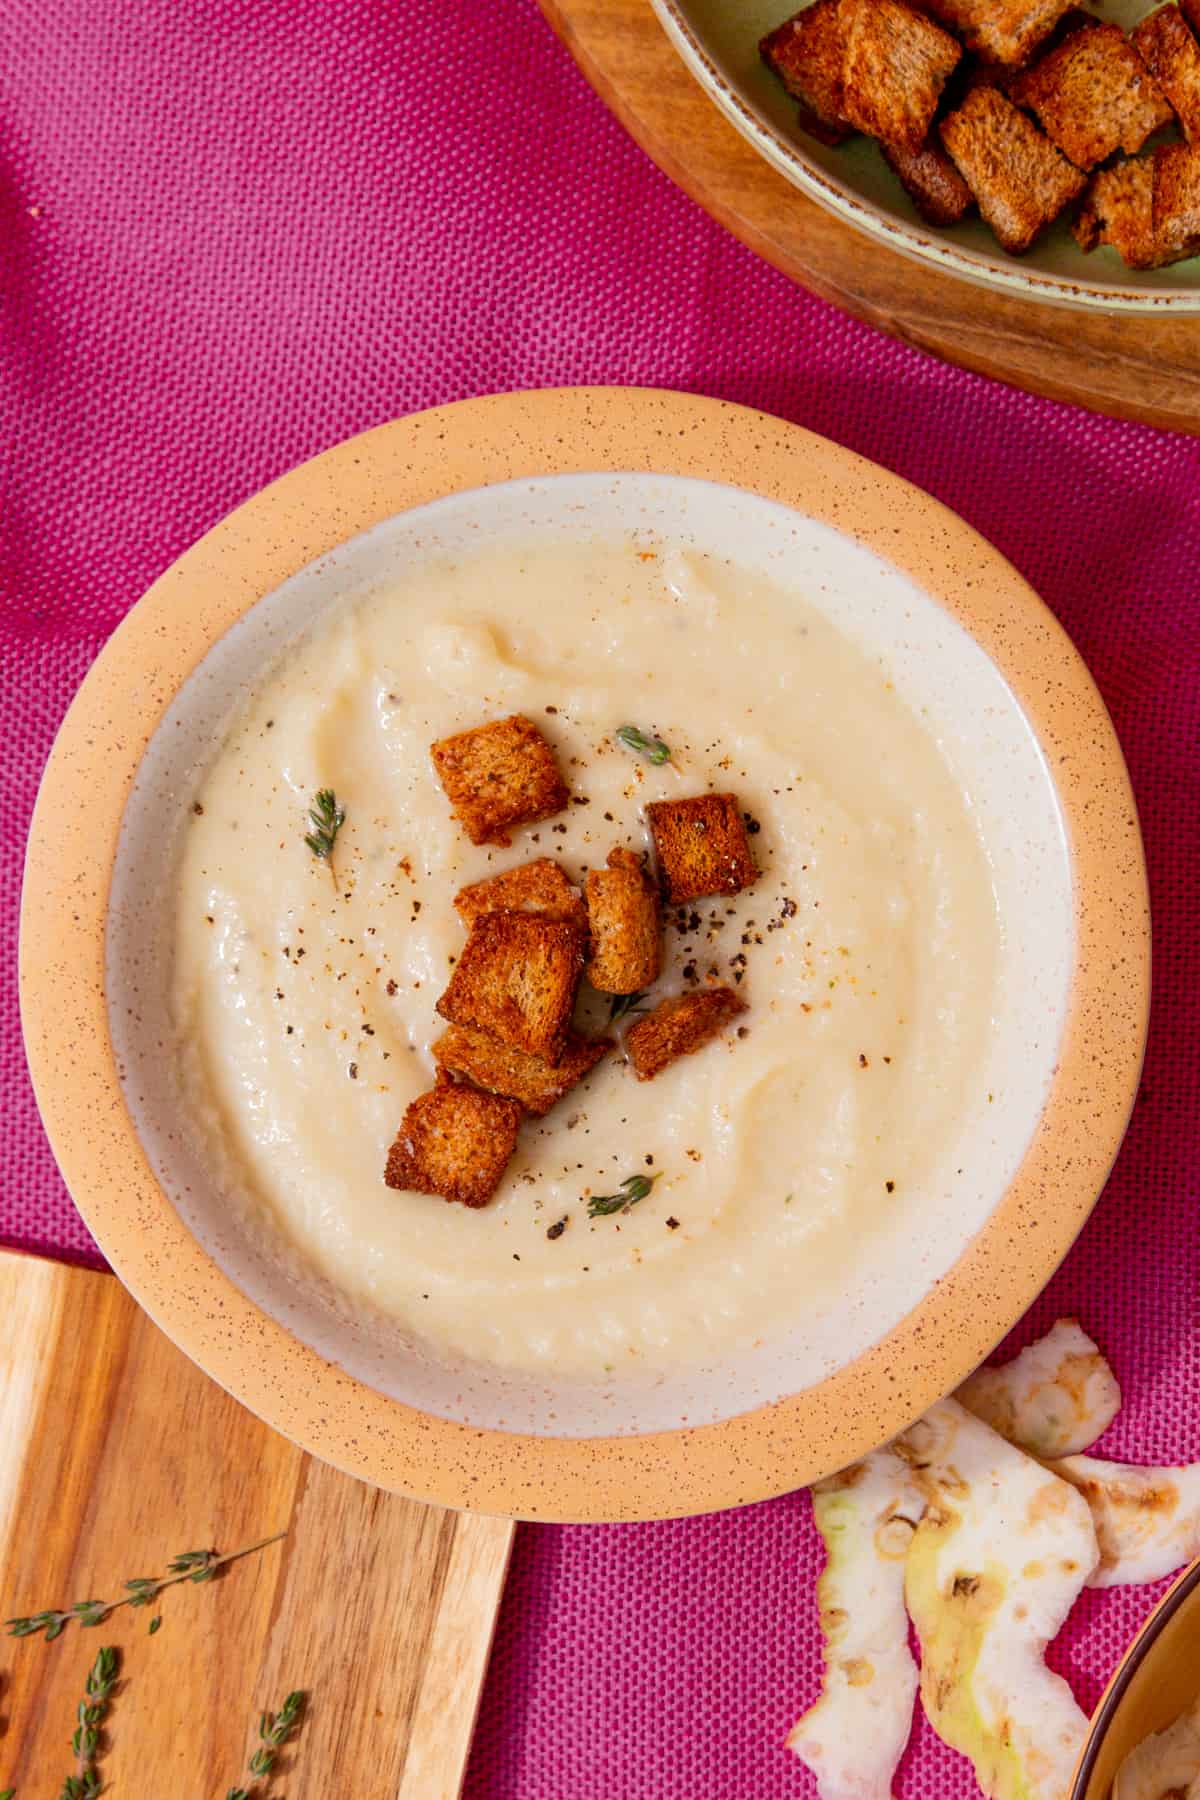 A bowl of pale creamy soup with golden browned croutons and seasoning in a bowl on a pink background next to some extra croutons in partial view, celeriac peel on and thyme sprigs.